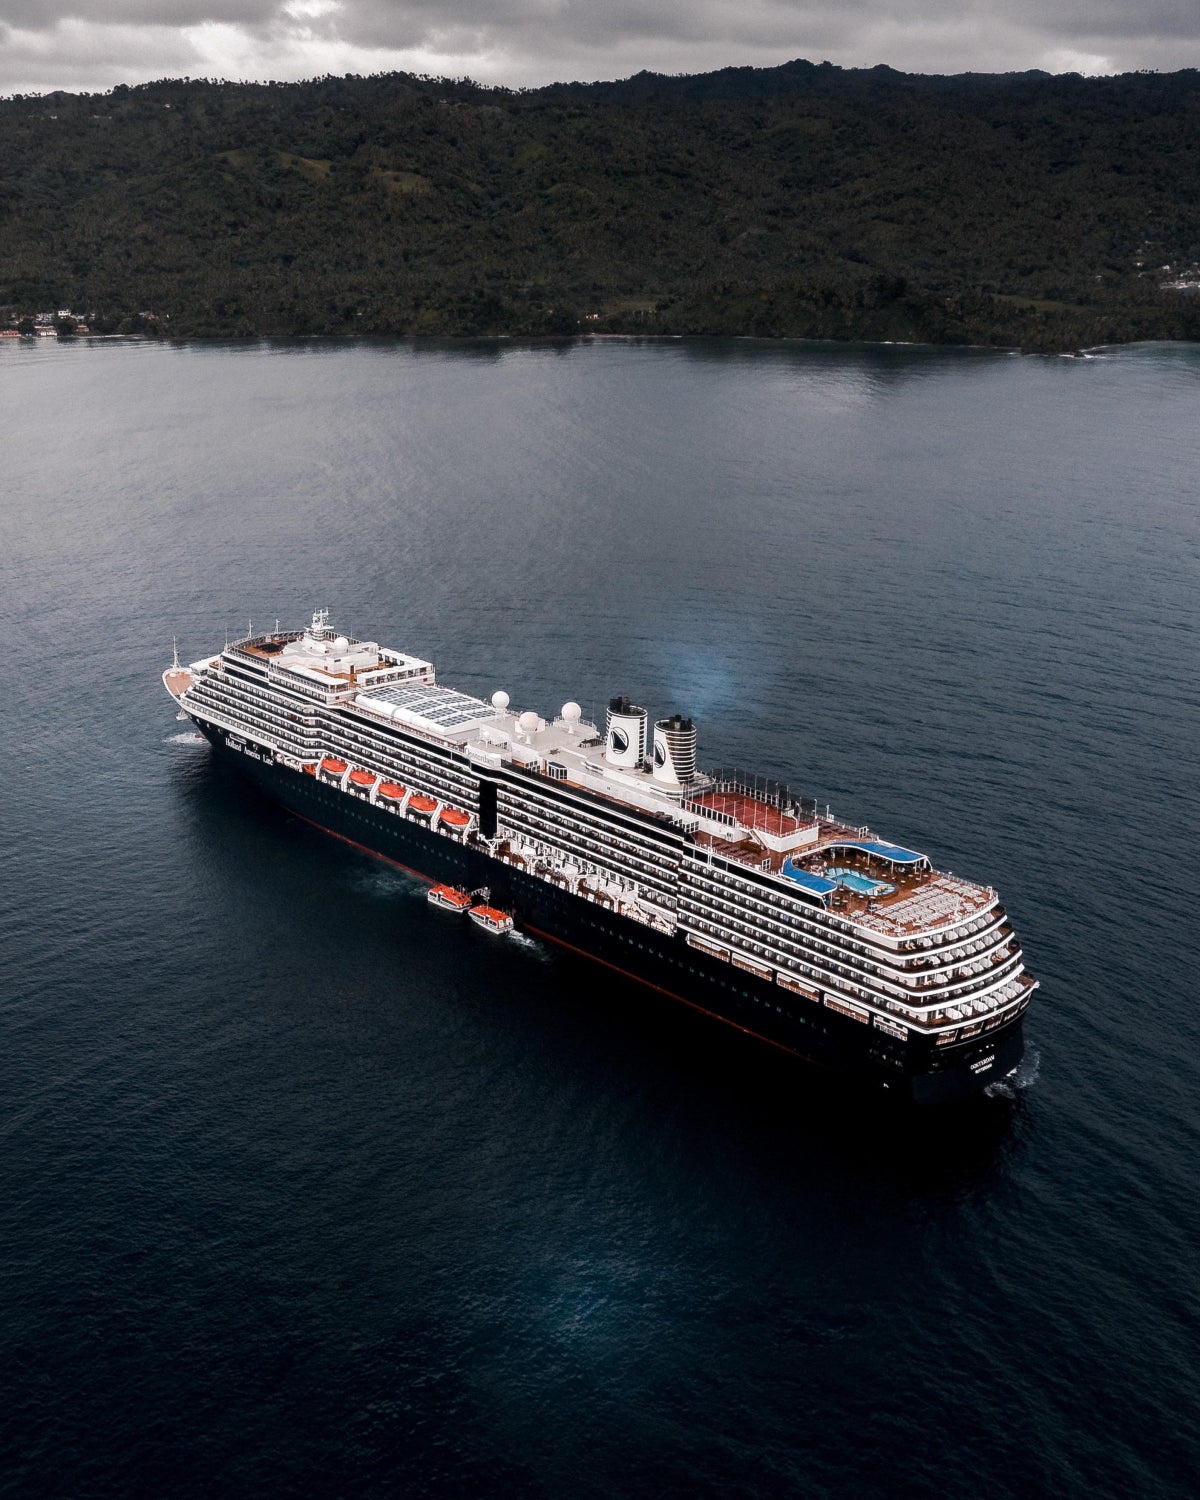 [Expired] New Amex Offer: Save $300 on Holland America Cruises